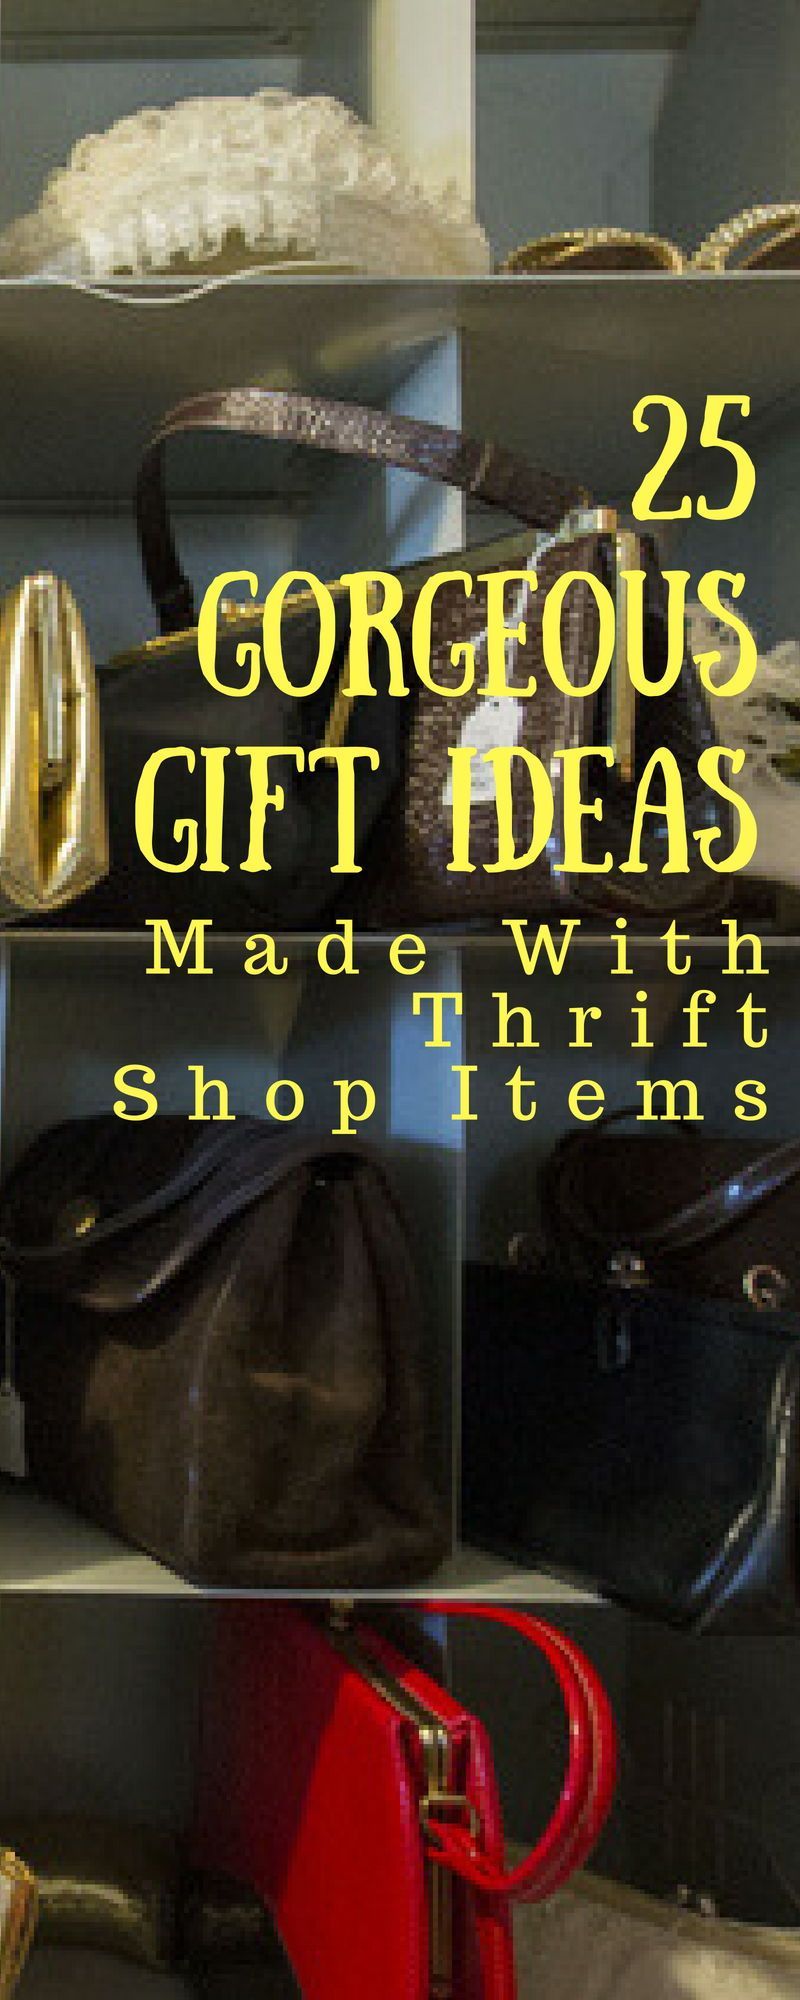 25 Gorgeous Gift Ideas Made With Thrift Shop Items -   11 thrift store DIY Clothes Vintage ideas